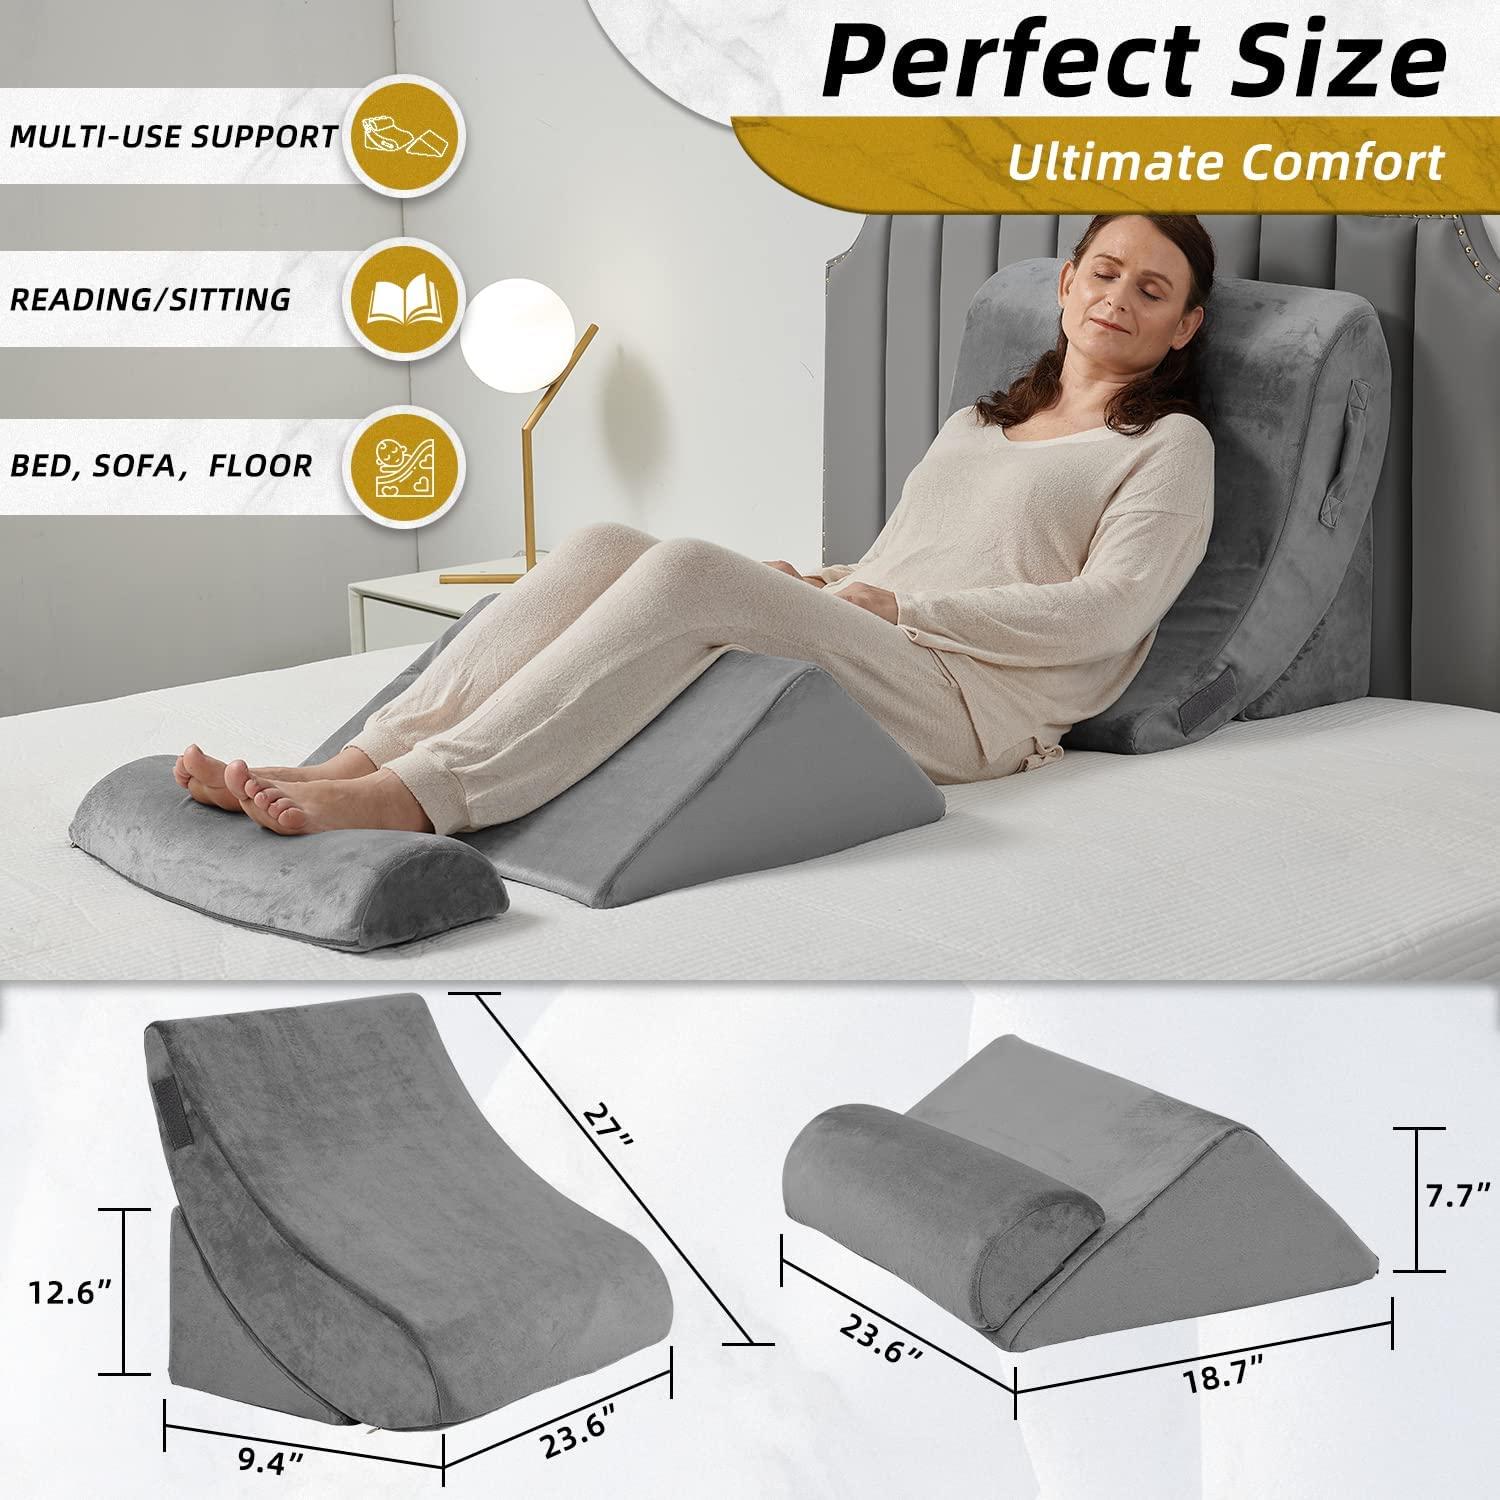 Wedge Pillow - 4 Piece Adjustable Bed Pillow Positioner for After